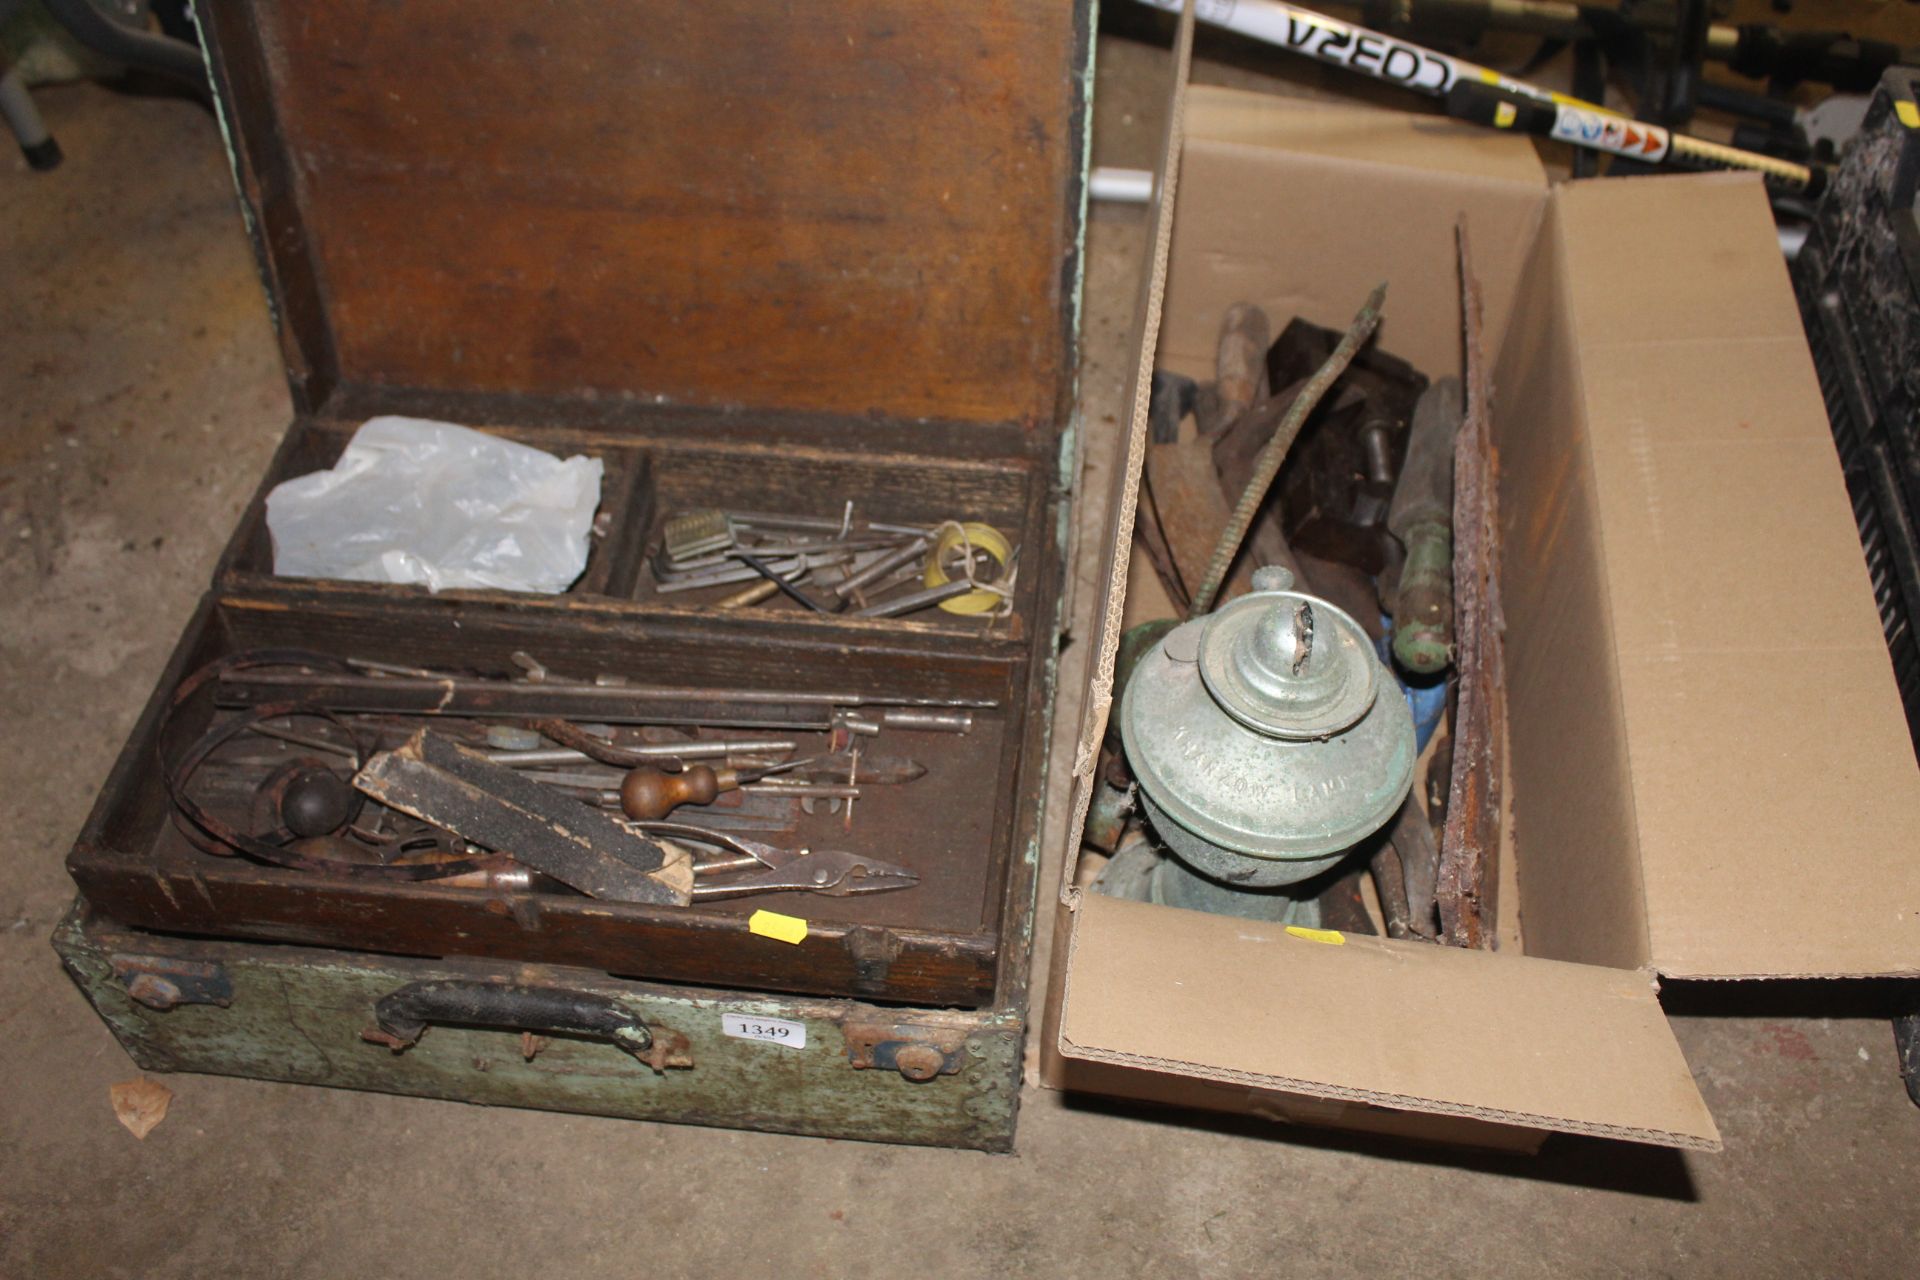 A wooden tool box with interior tray and contents